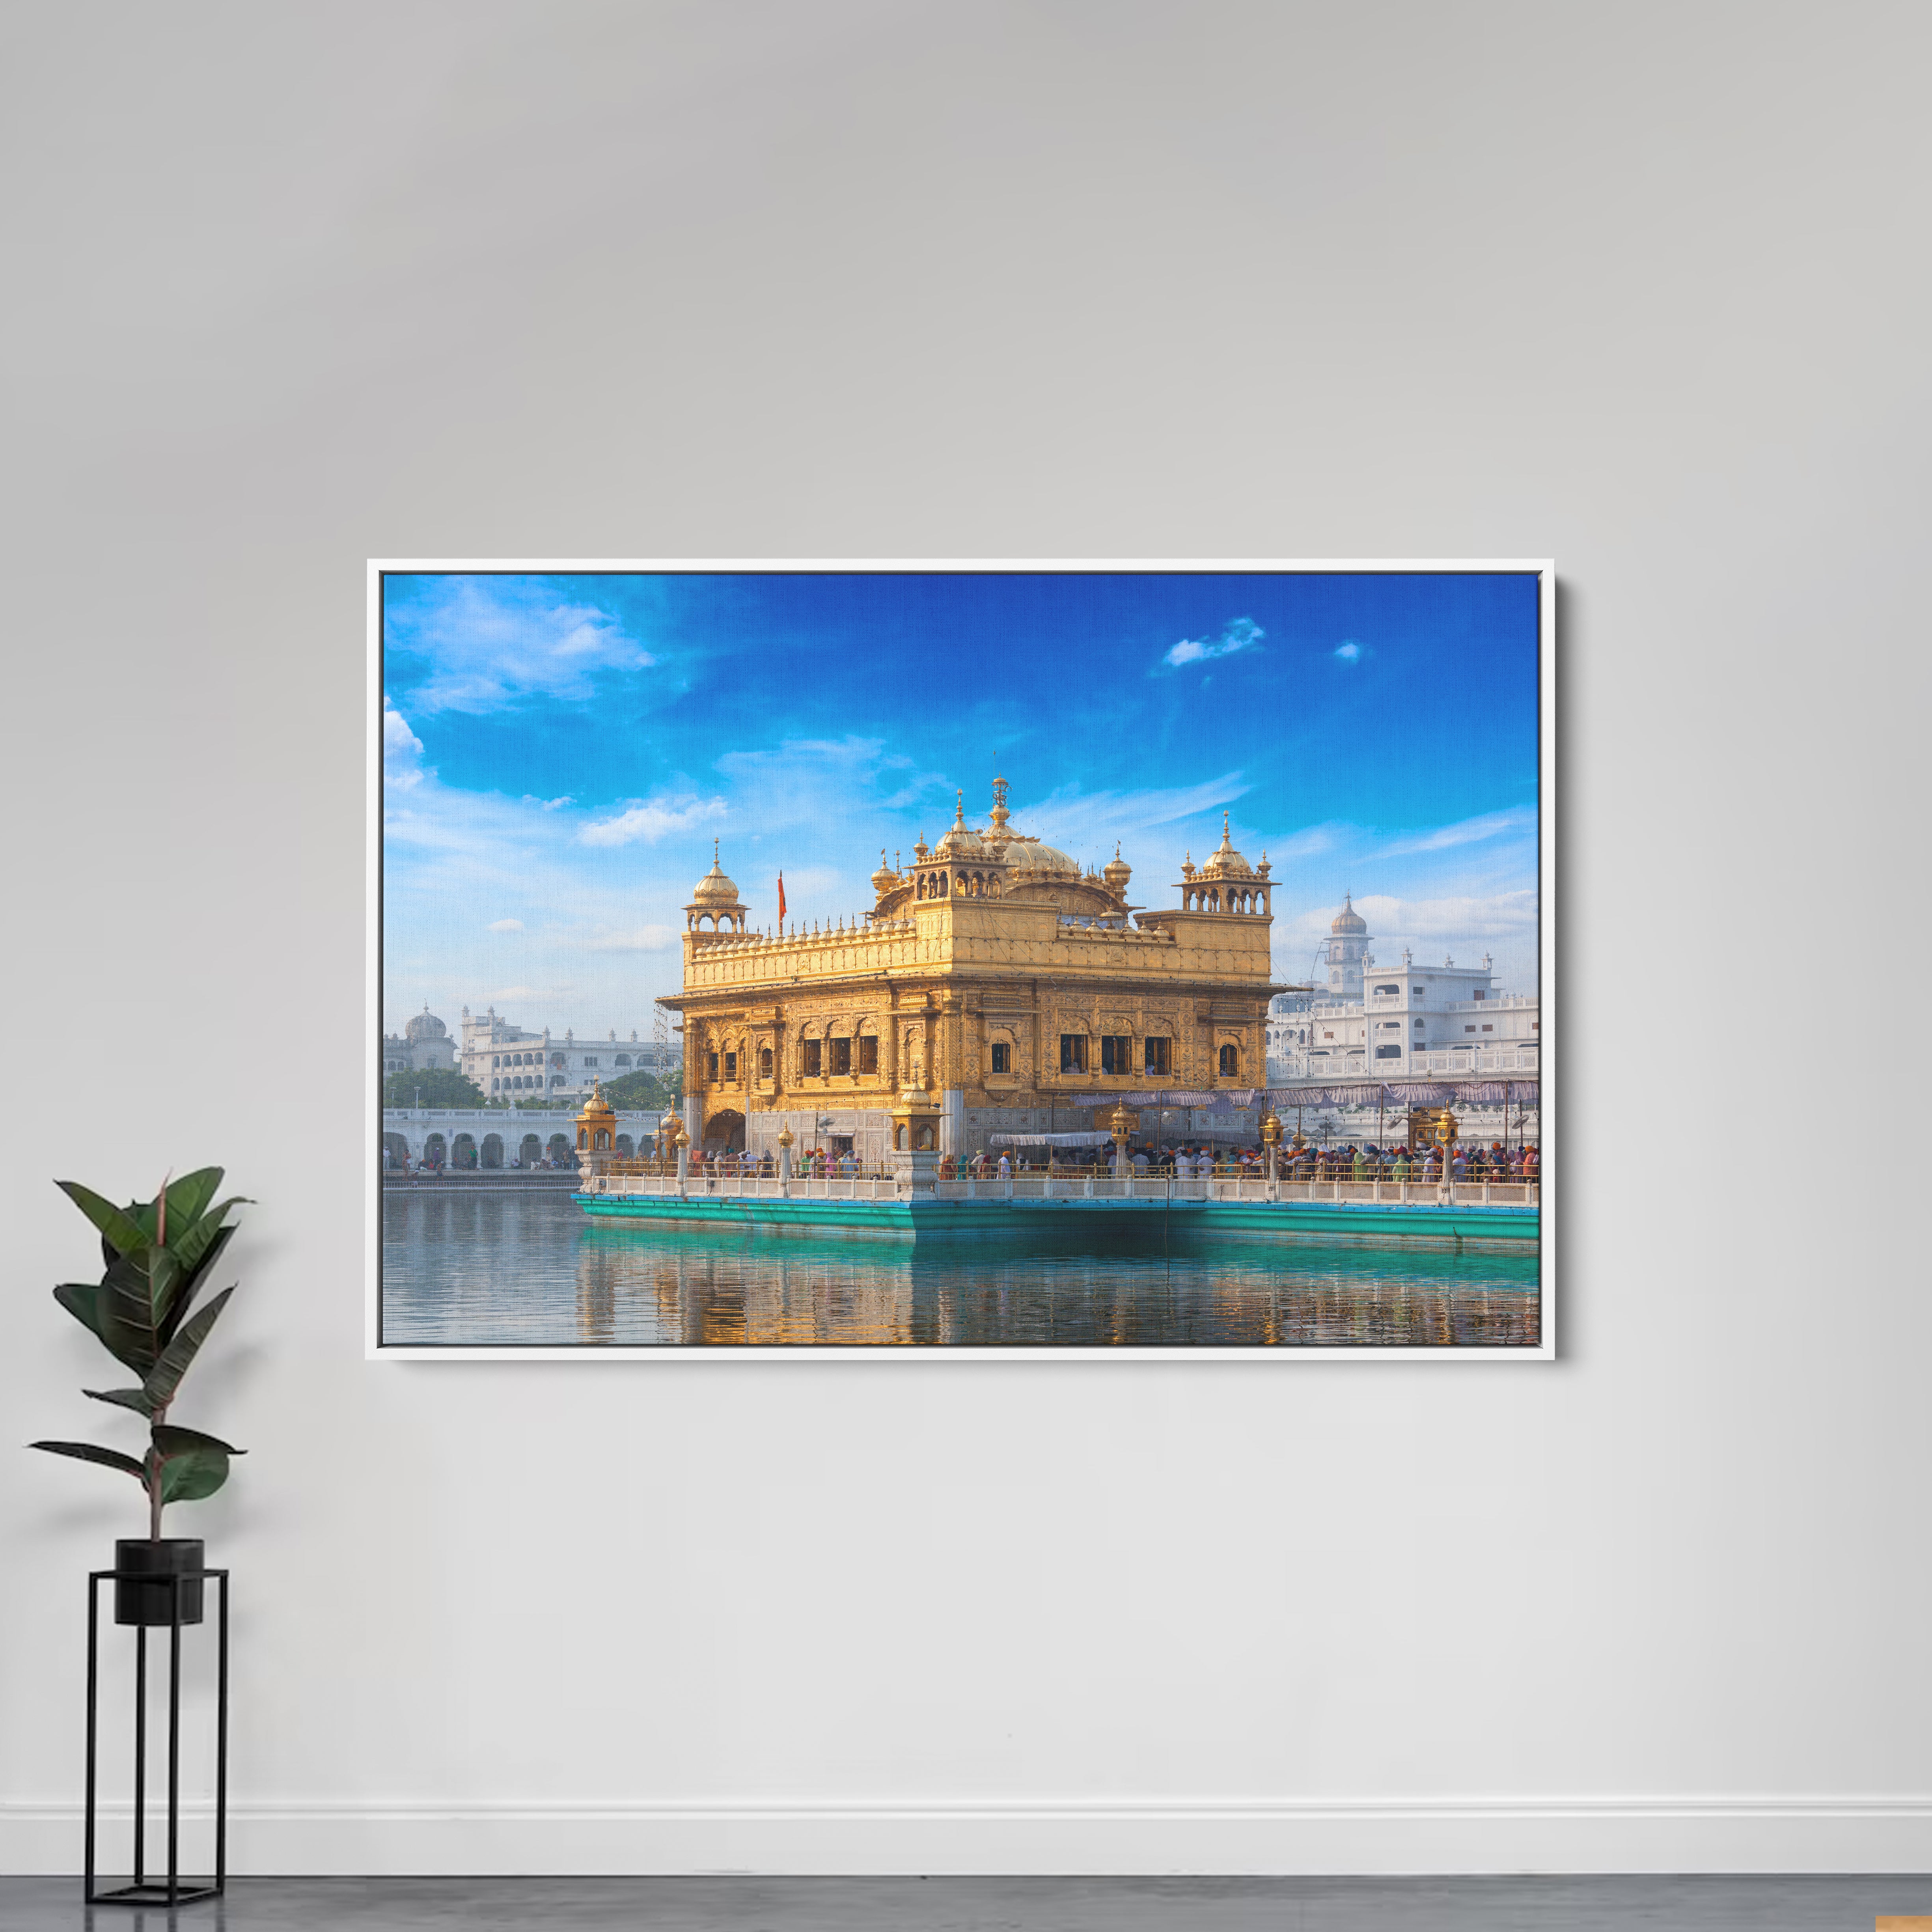 Amritsar Golden Temple Canvas Wall Painting